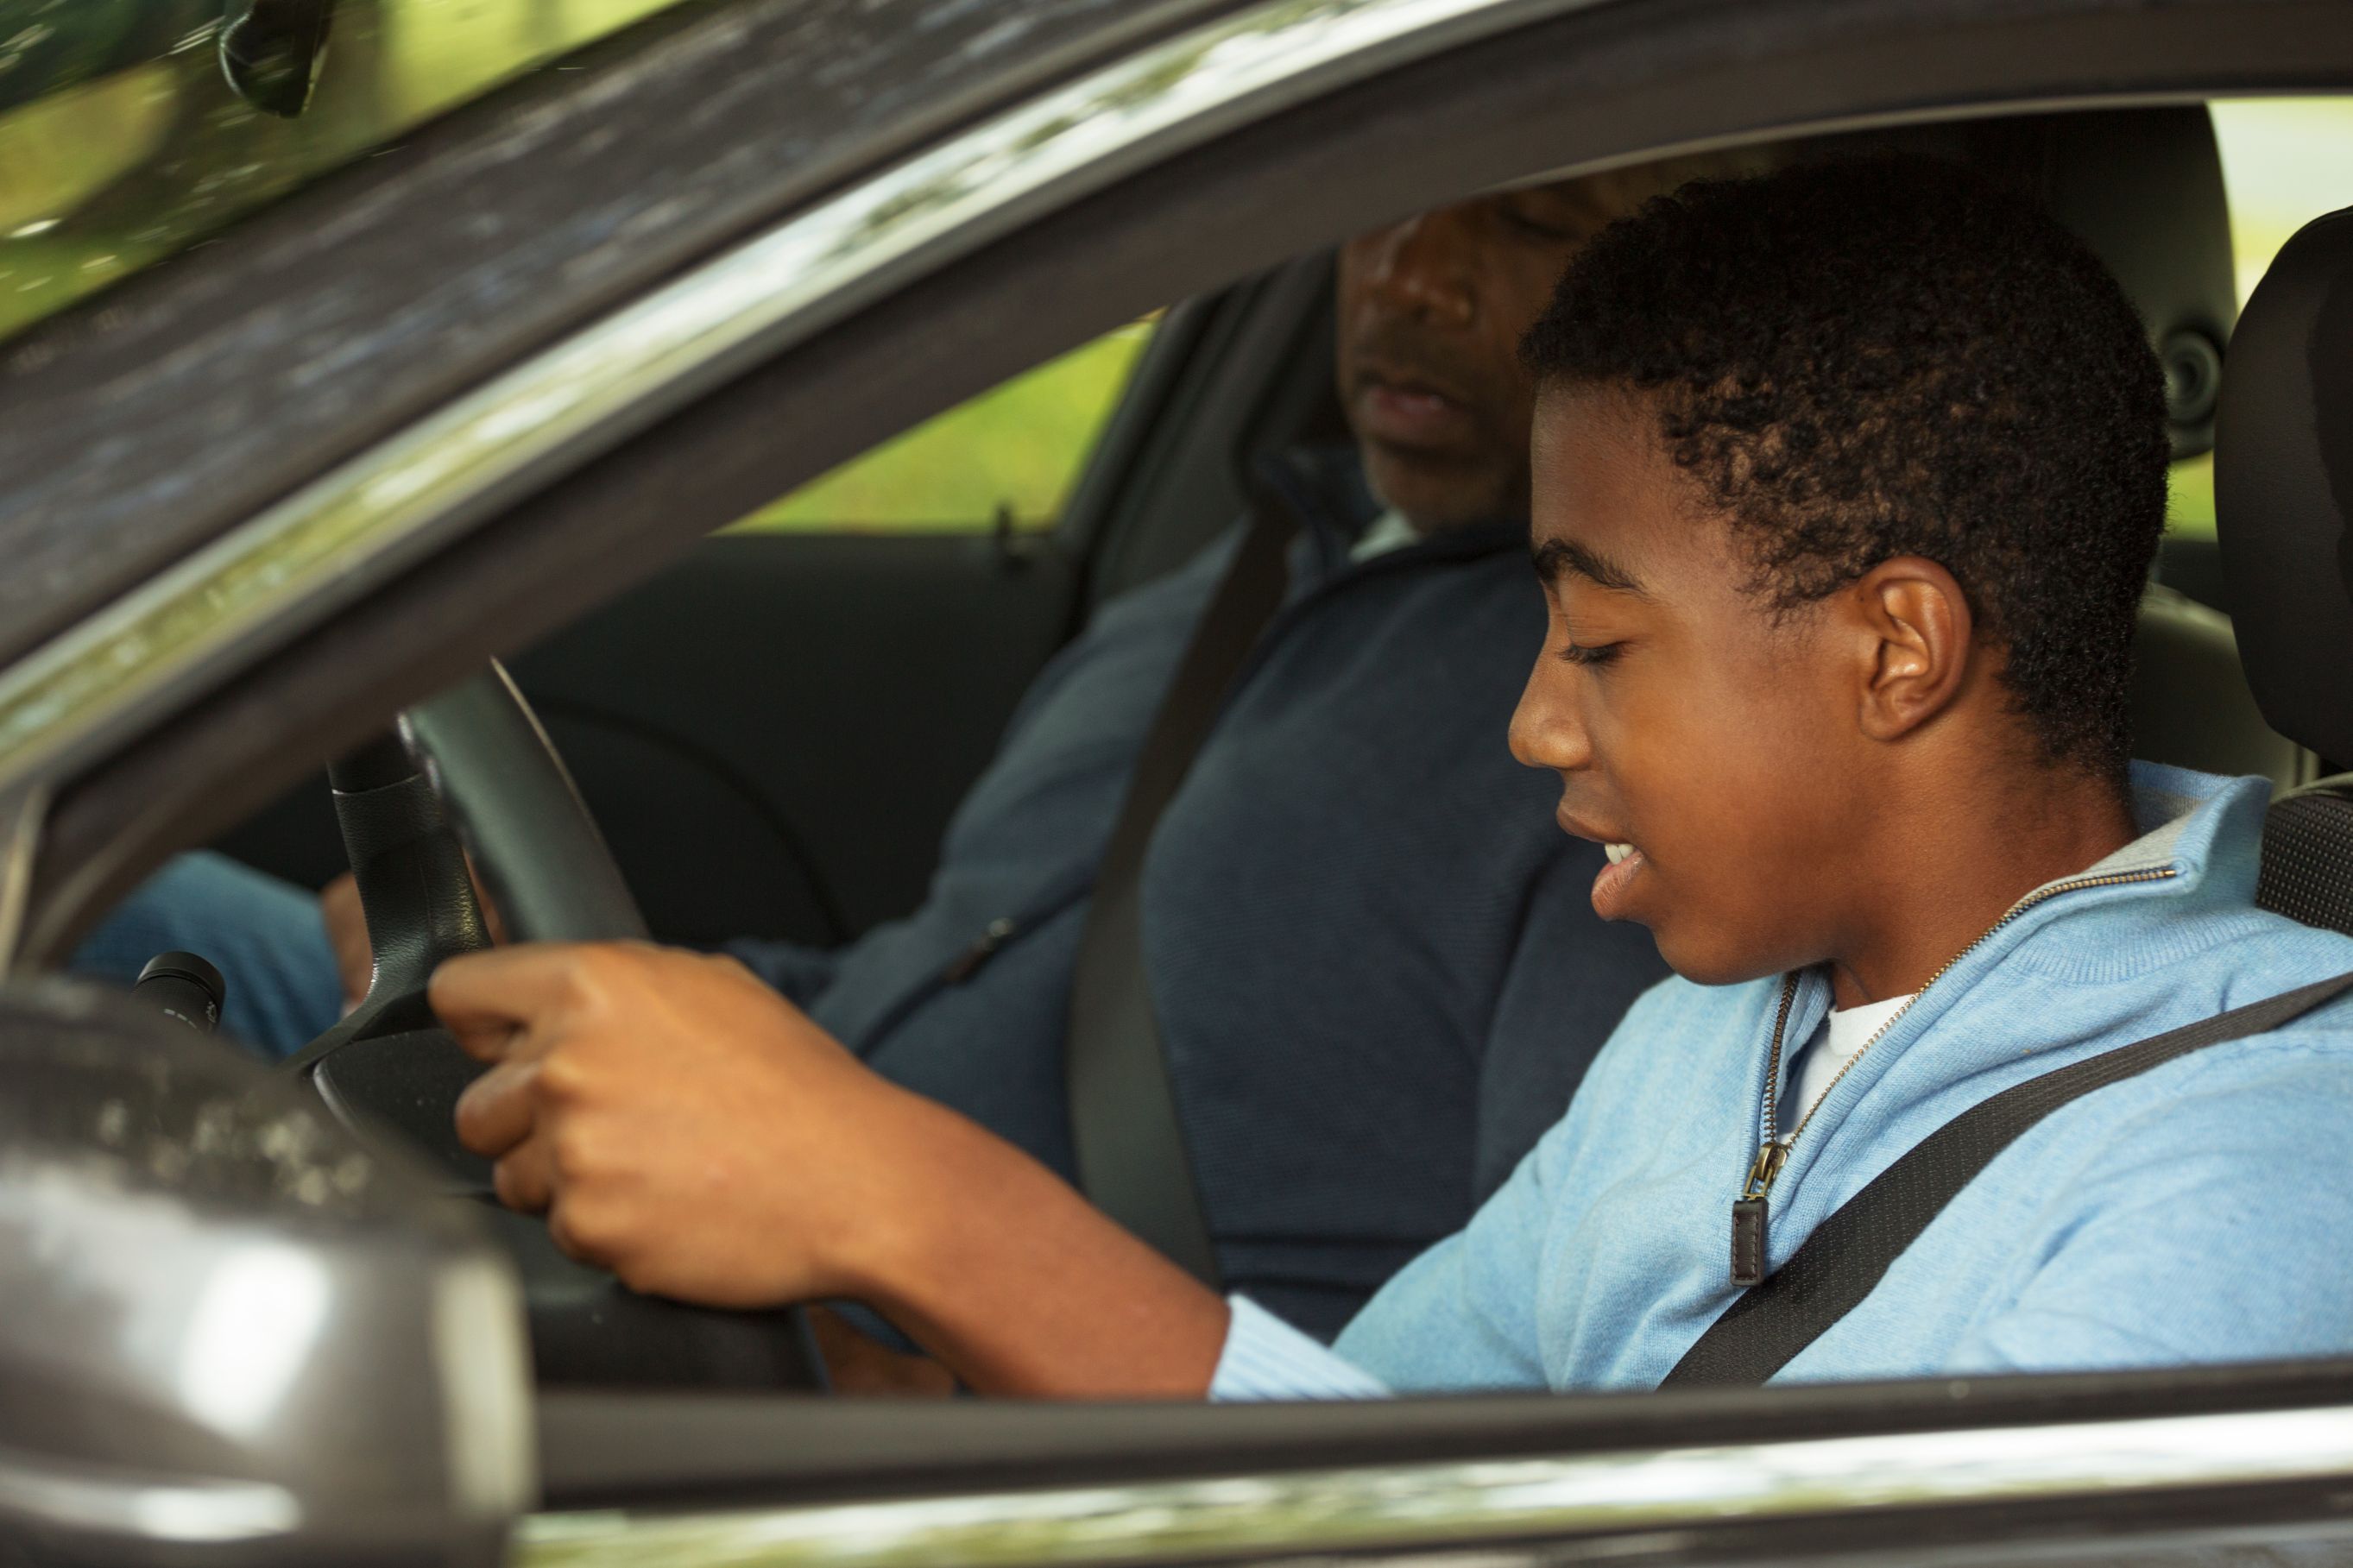 Driving Schools Near Me What to Know | SmartGuy